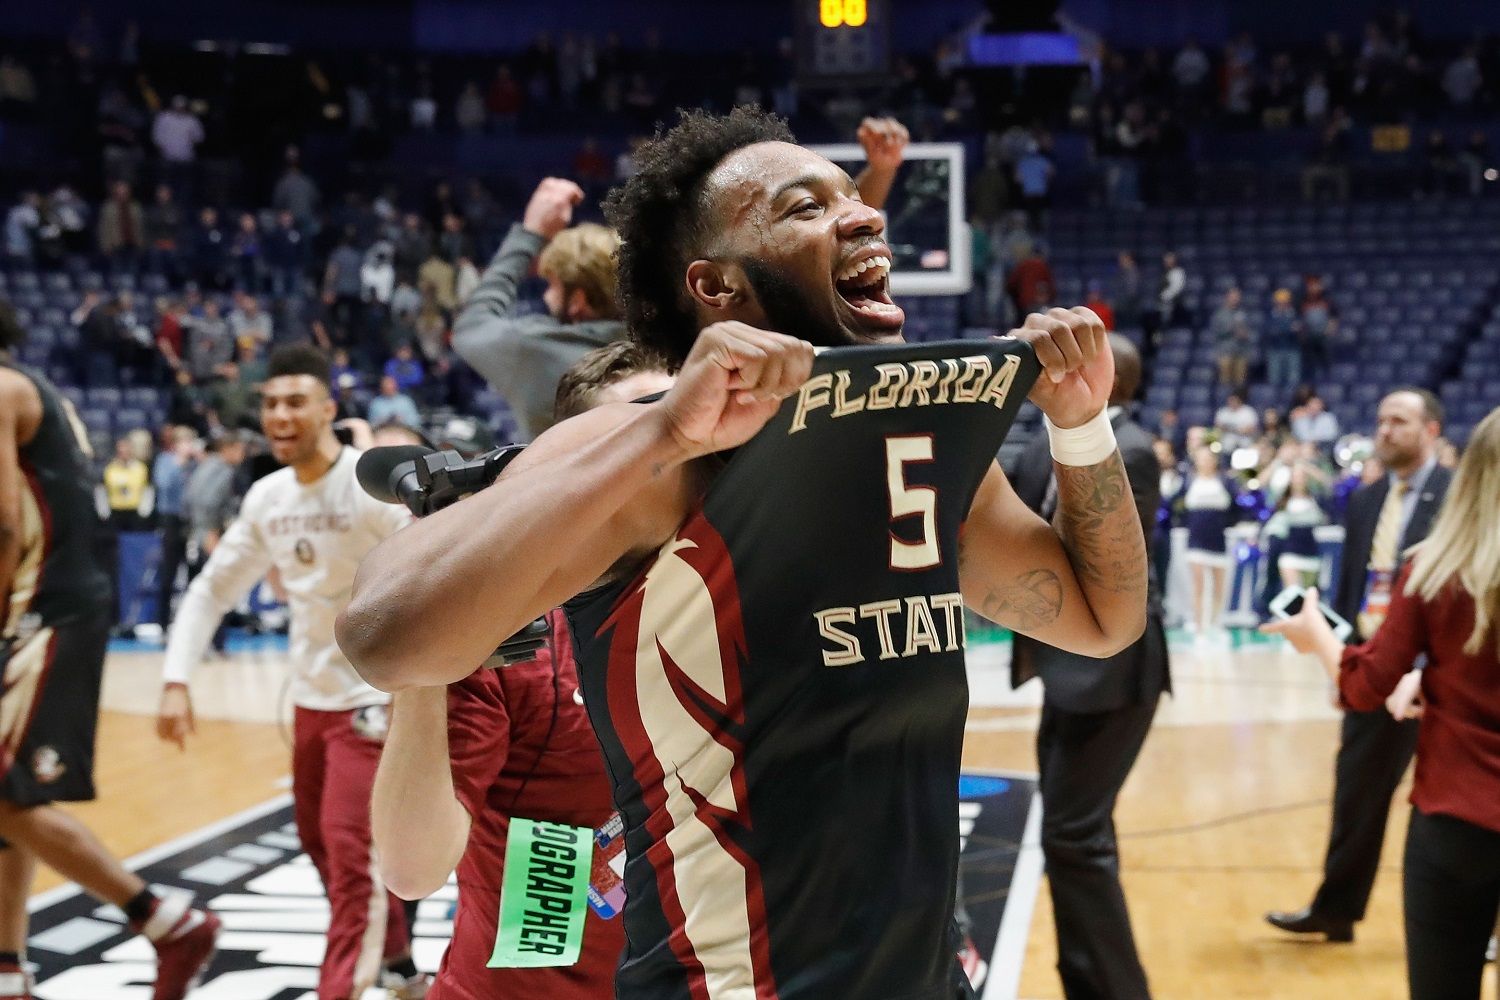 NASHVILLE, TN - MARCH 18:  PJ Savoy #5 of the Florida State Seminoles reacts after defeating the Xavier Musketeers during the second half in the second round of the 2018 Men's NCAA Basketball Tournament at Bridgestone Arena on March 18, 2018 in Nashville, Tennessee.  (Photo by Frederick Breedon/Getty Images)